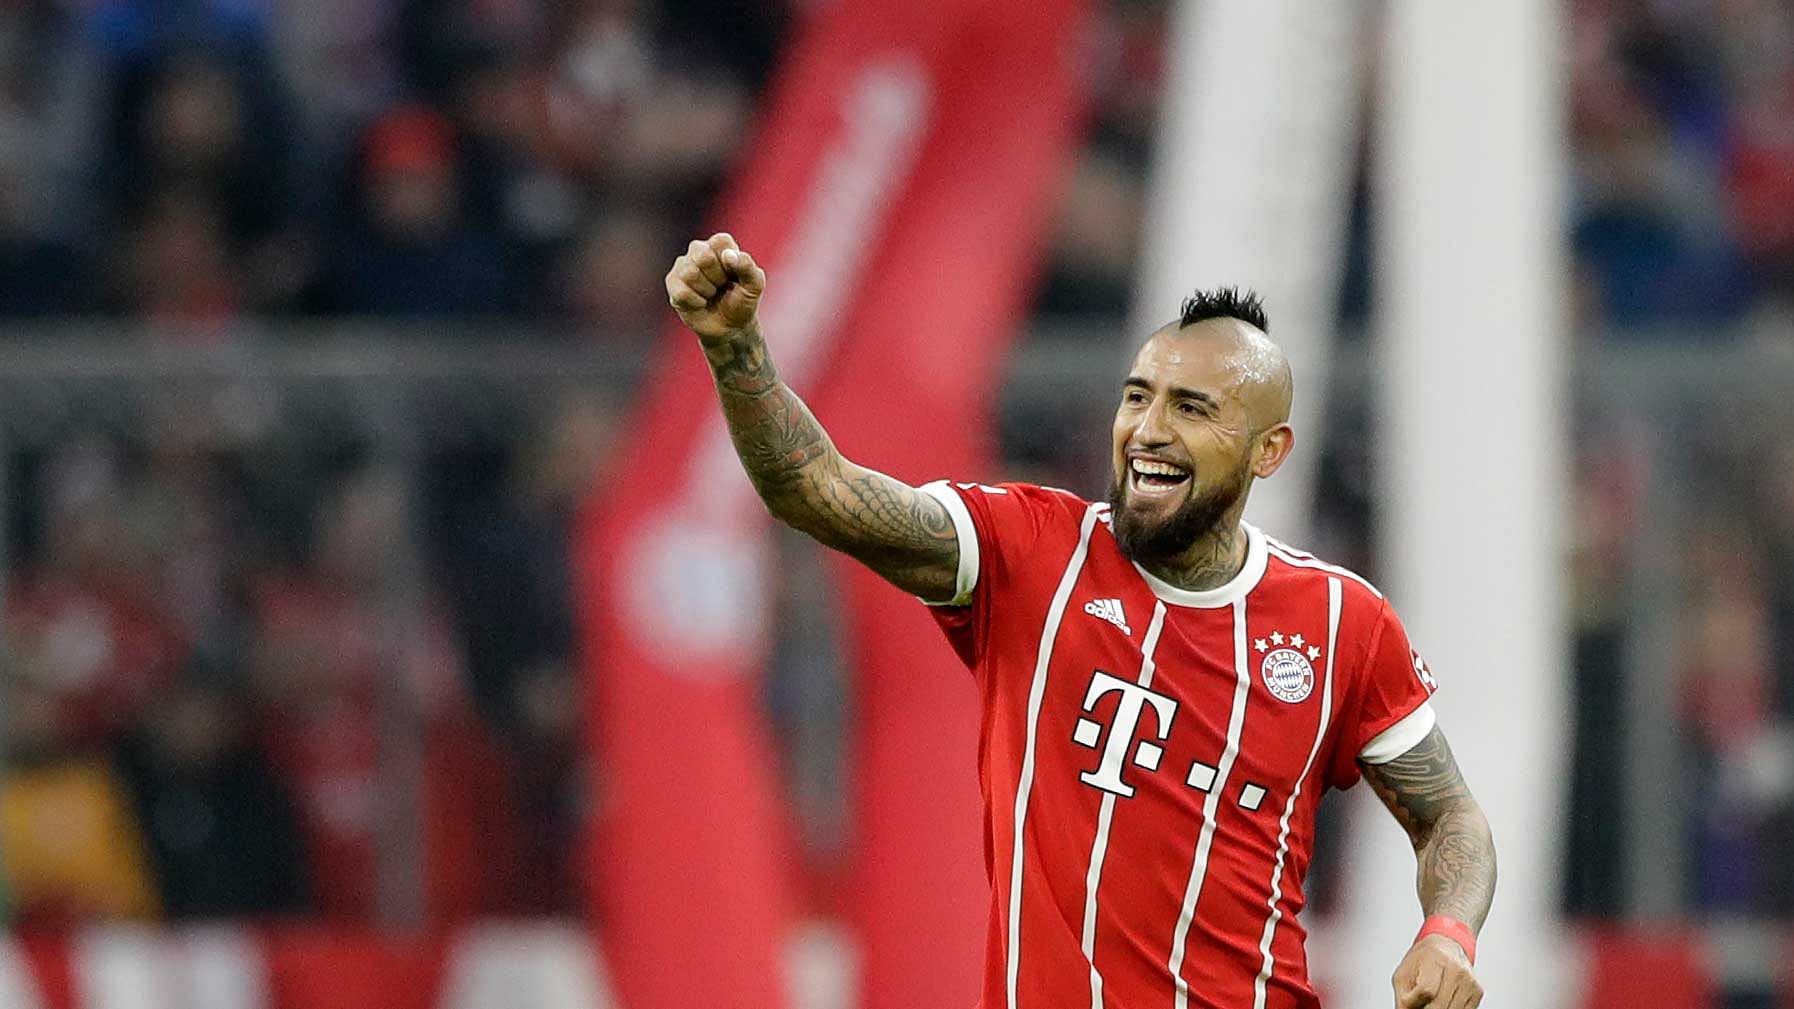 Arturo Vidal will sign a three-year deal after having a medical in the next few days, Barca said in a statement.